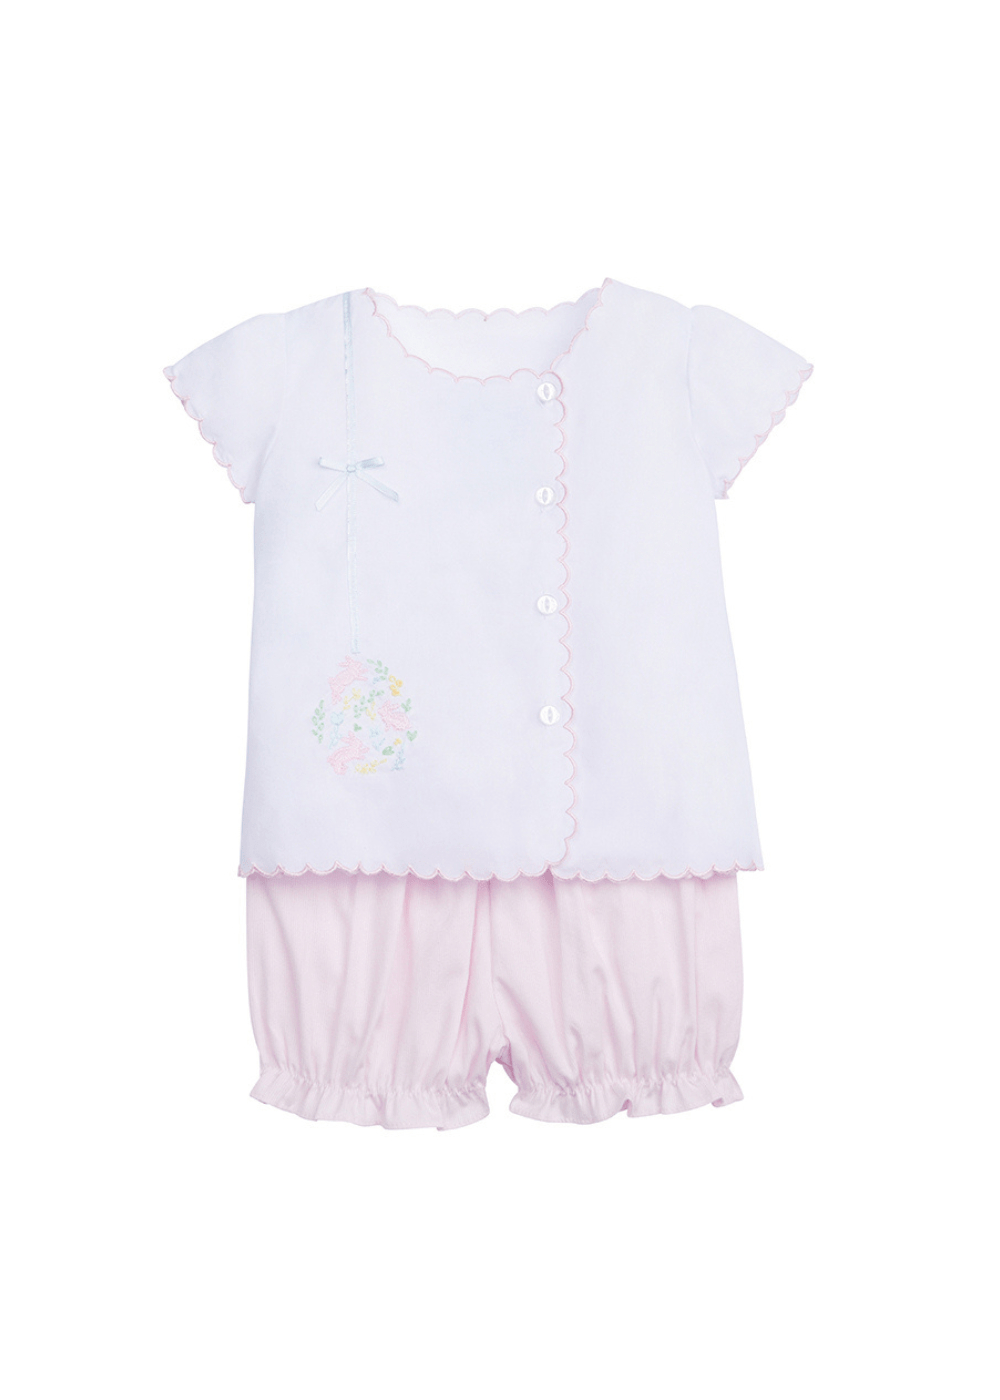 classic childrens clothing girls bloomer set with light pink bloomers and button up top with embroidered bunny detail